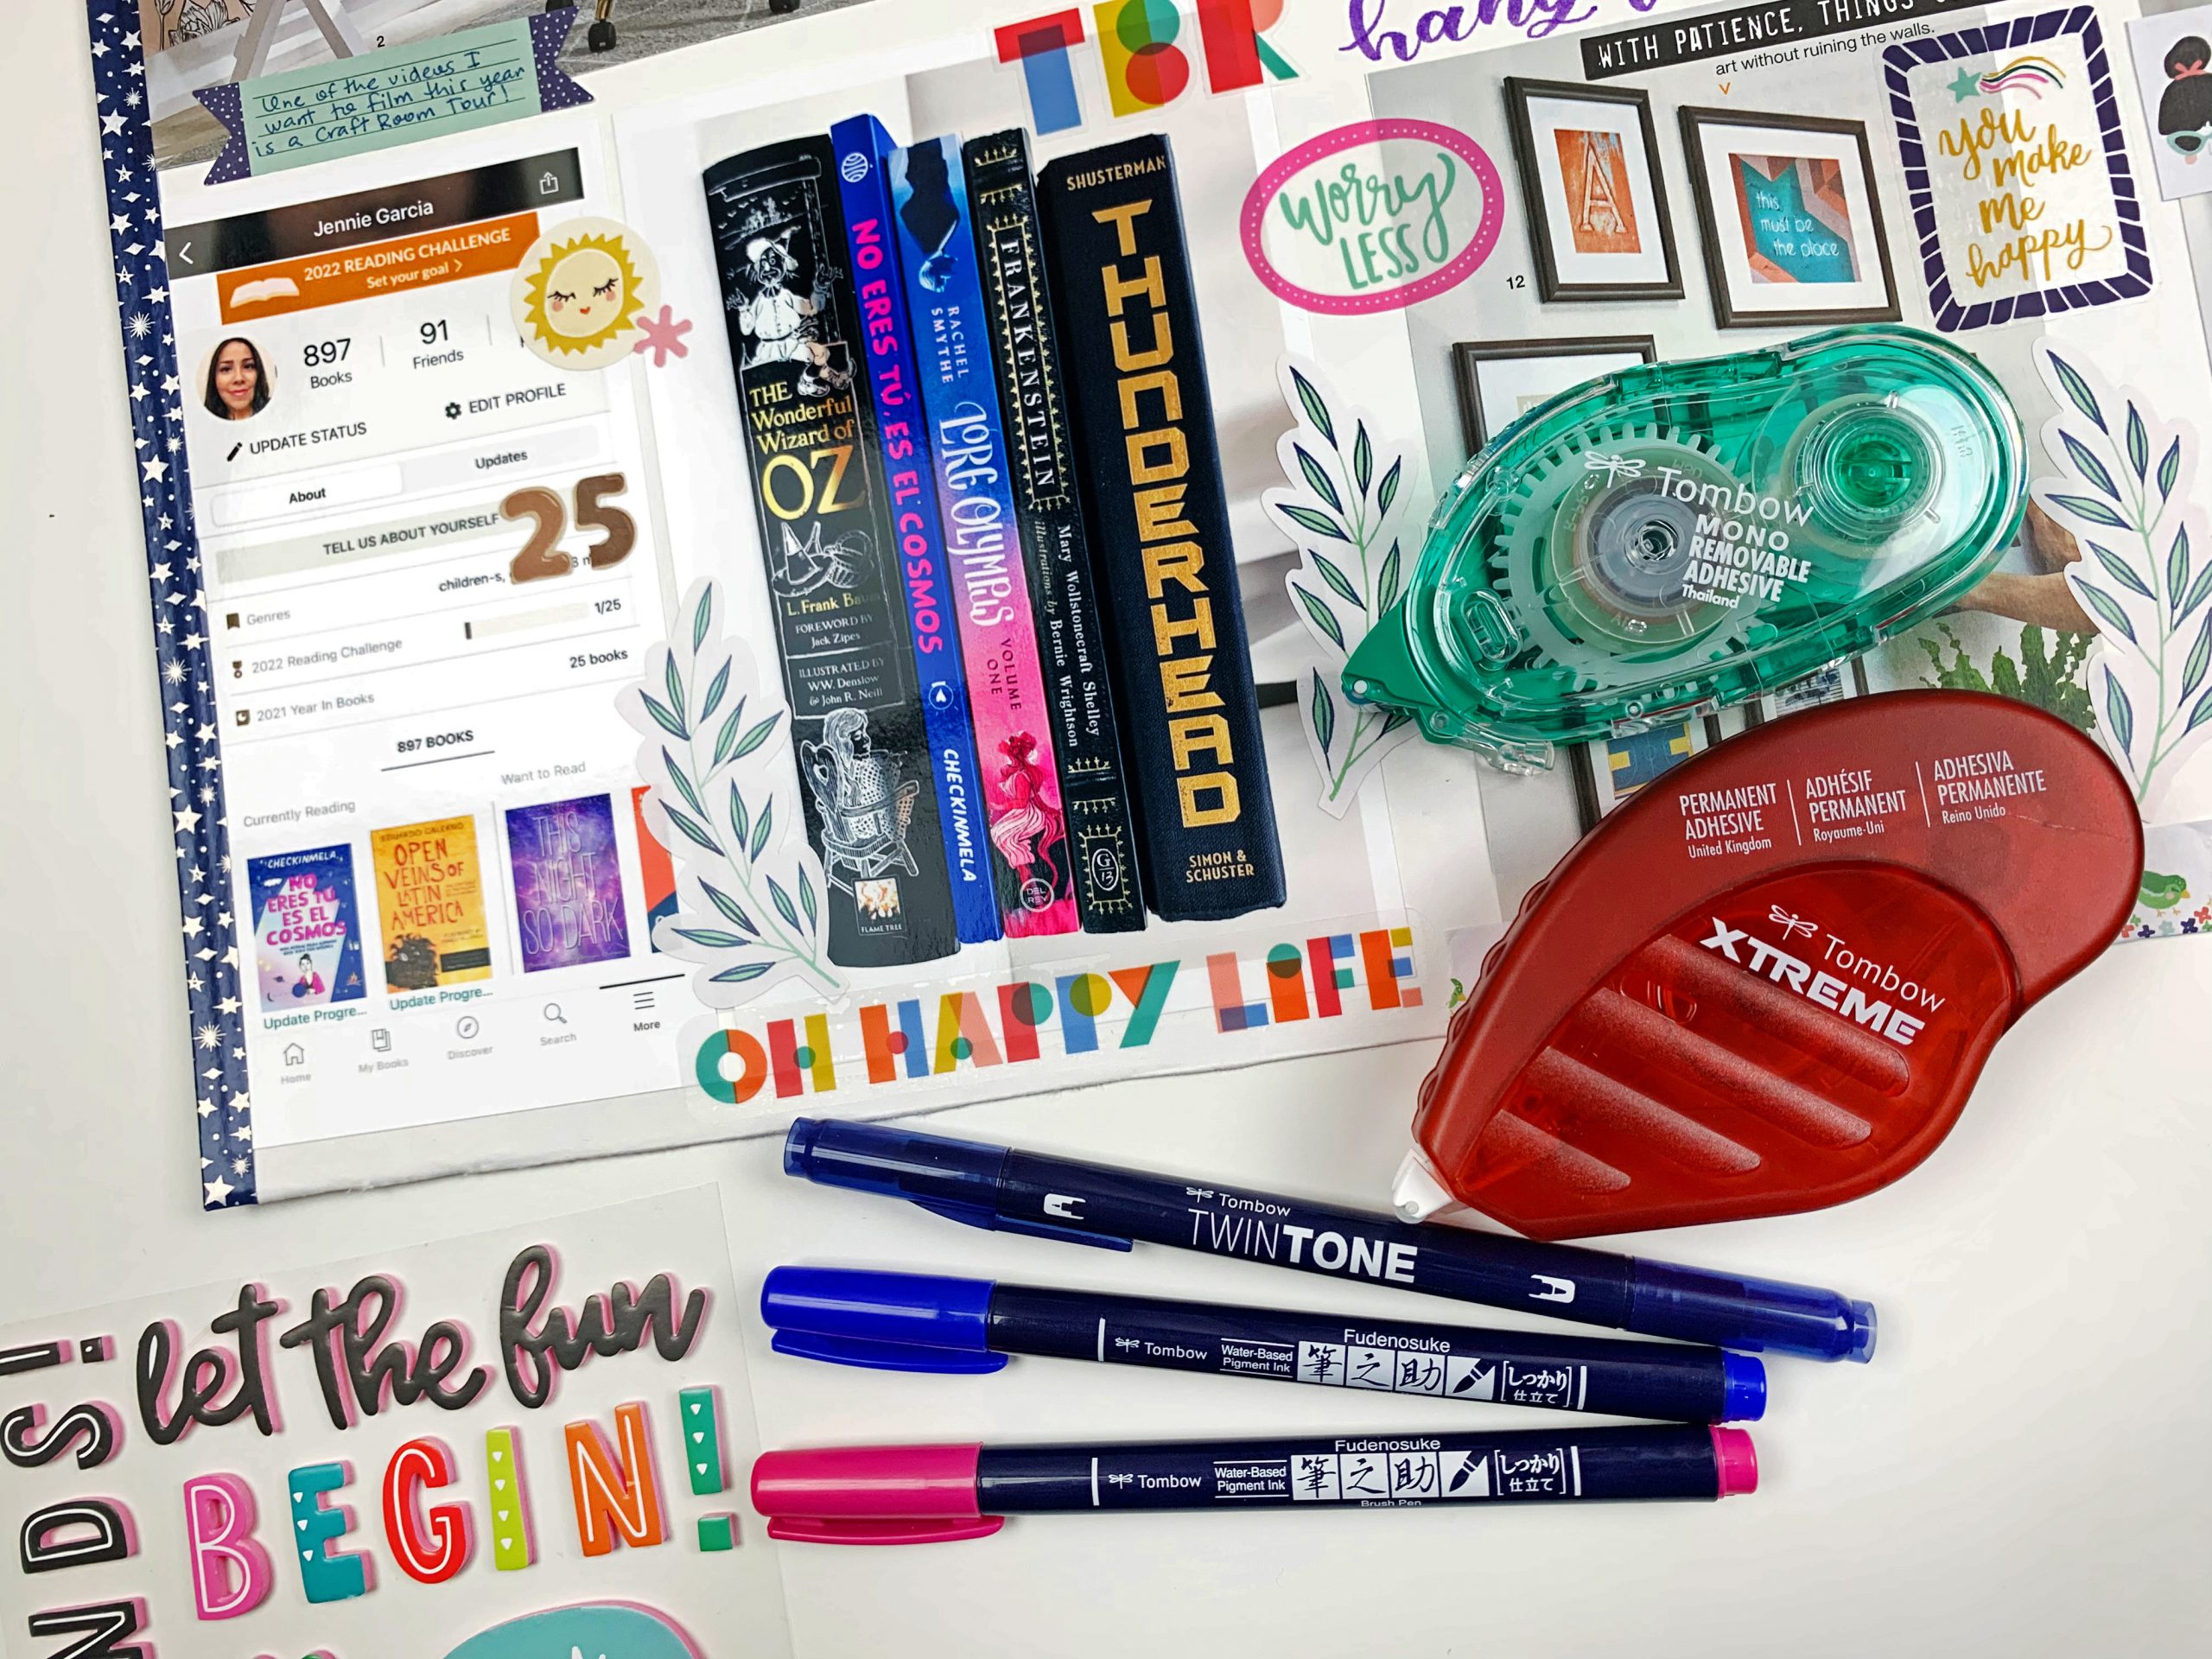 Monday Matters: A beginner's guide to Vision boards and how to create one  in your Bullet Journal – Keeping it creative